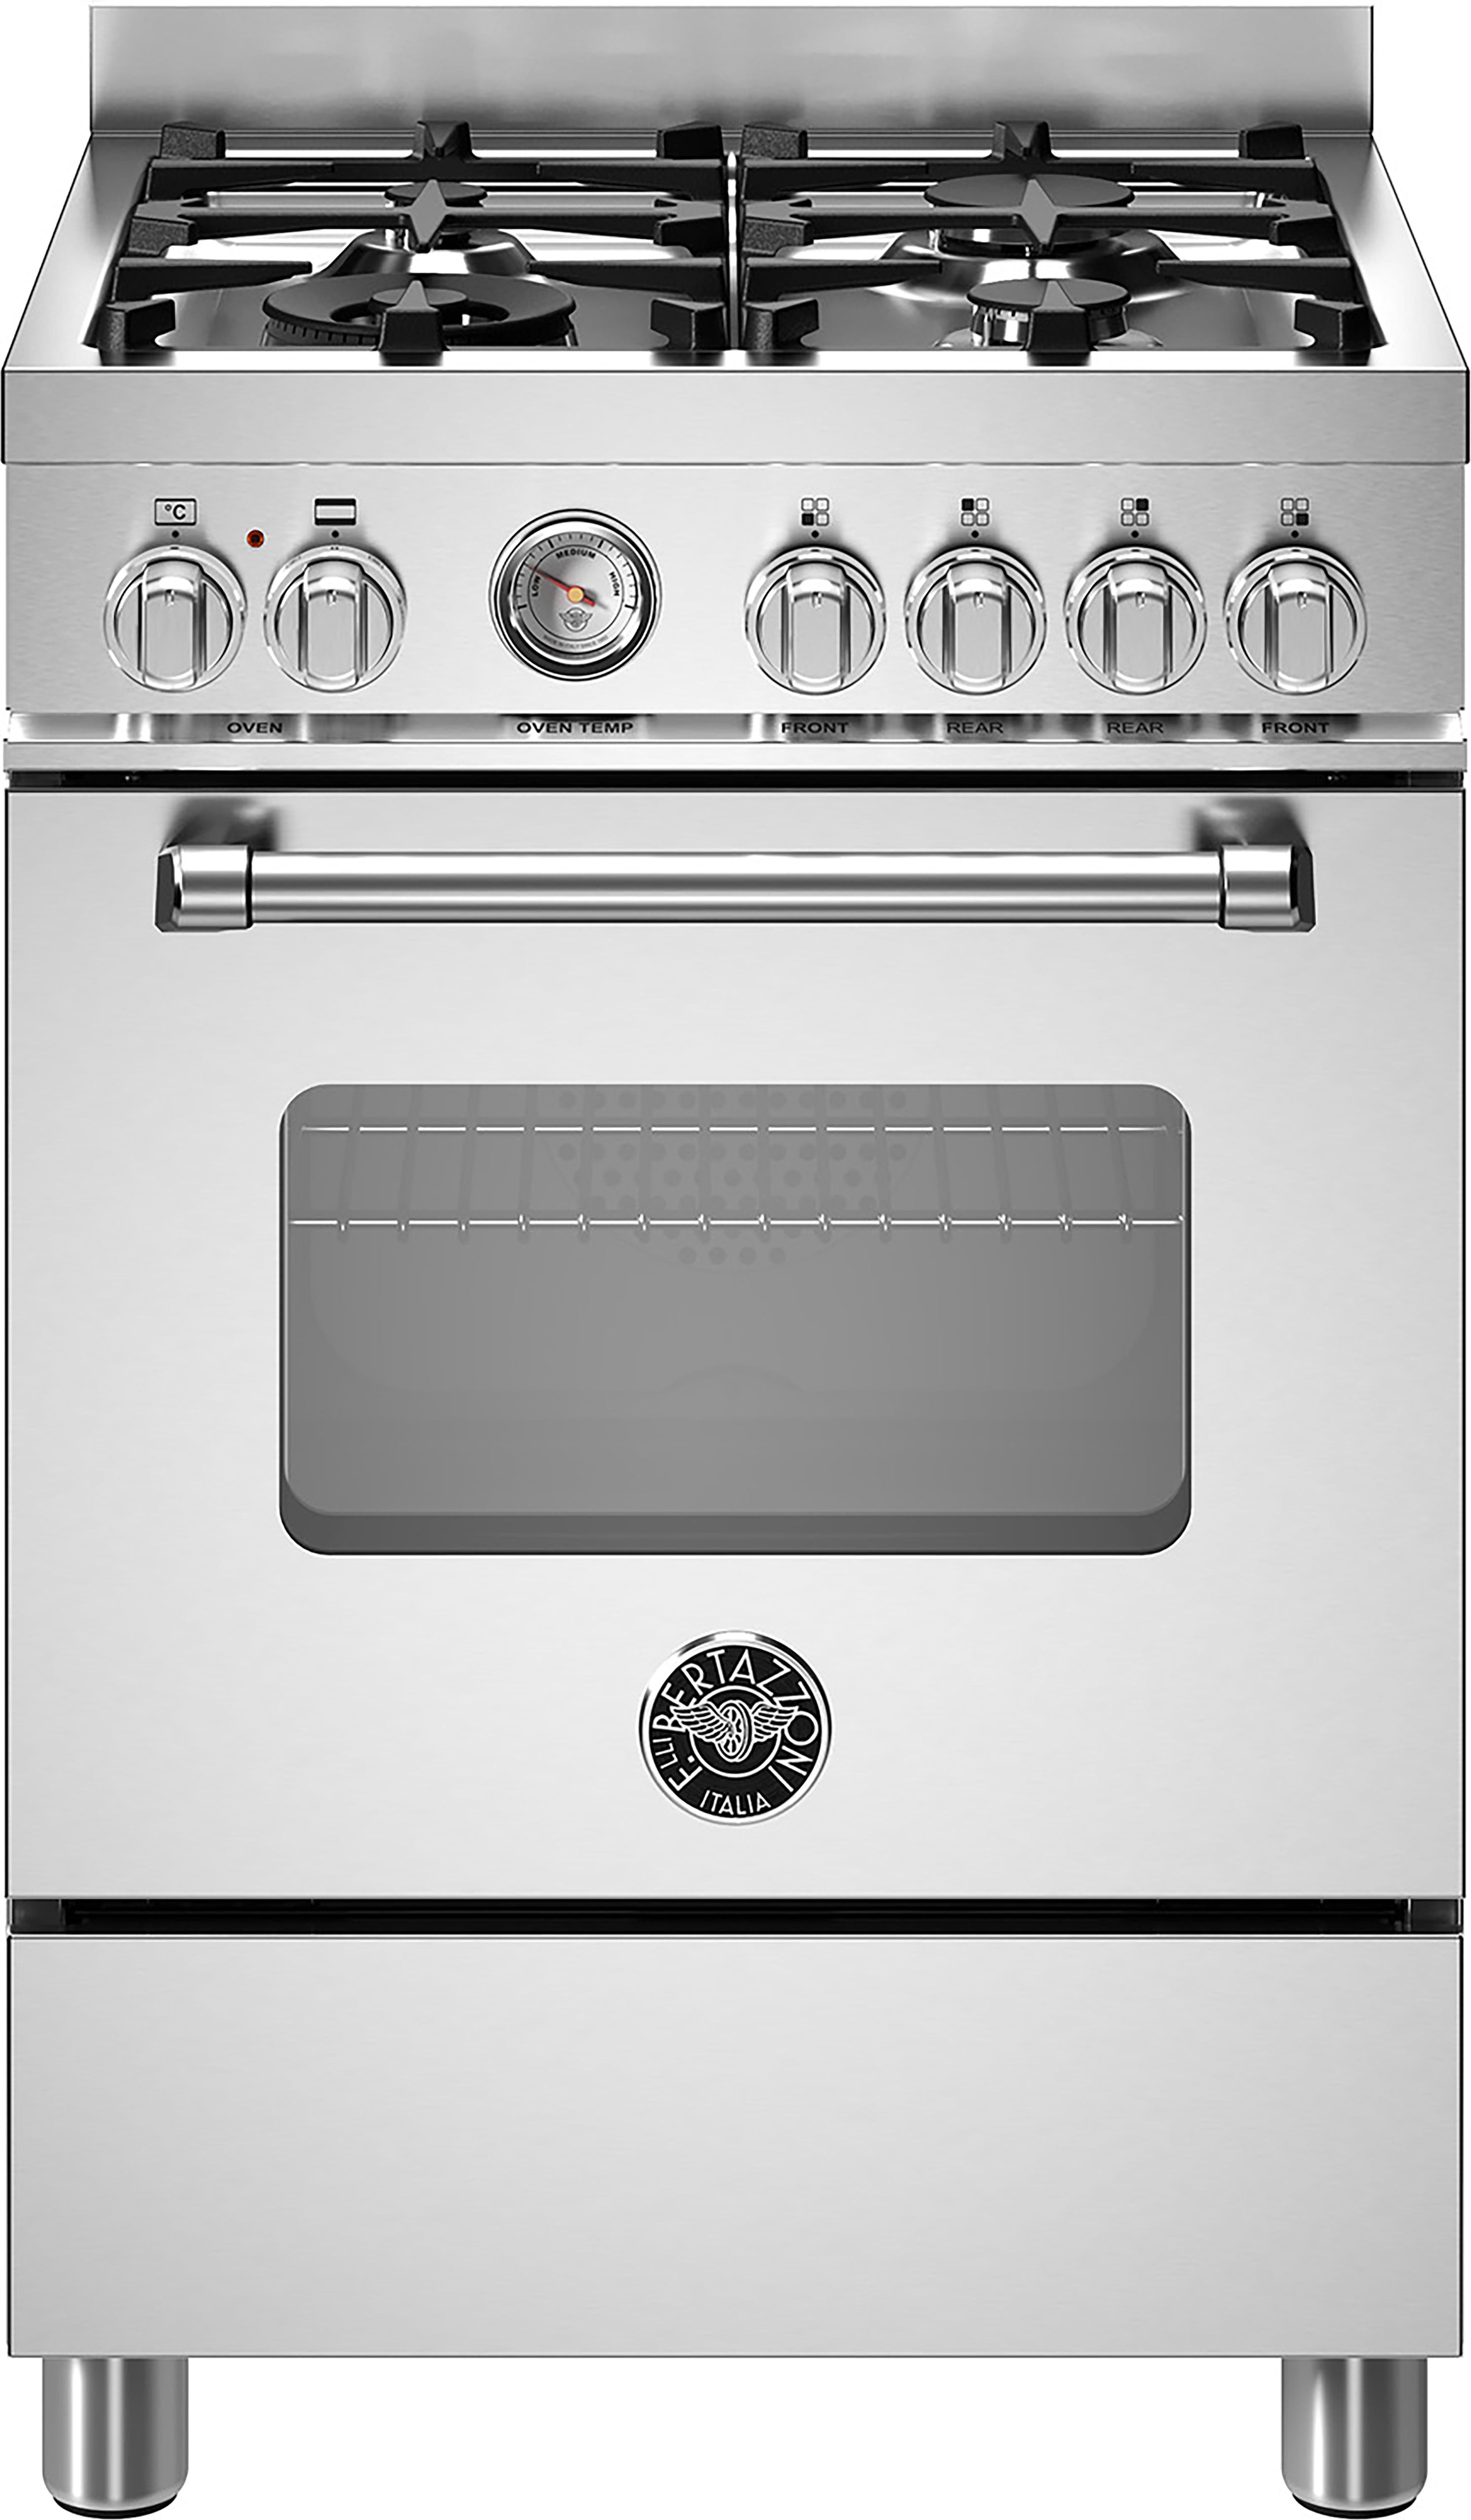 Bertazzoni Master Series MAS64L1EXC 60cm Freestanding Dual Fuel Cooker - Stainless Steel - A Rated, Stainless Steel